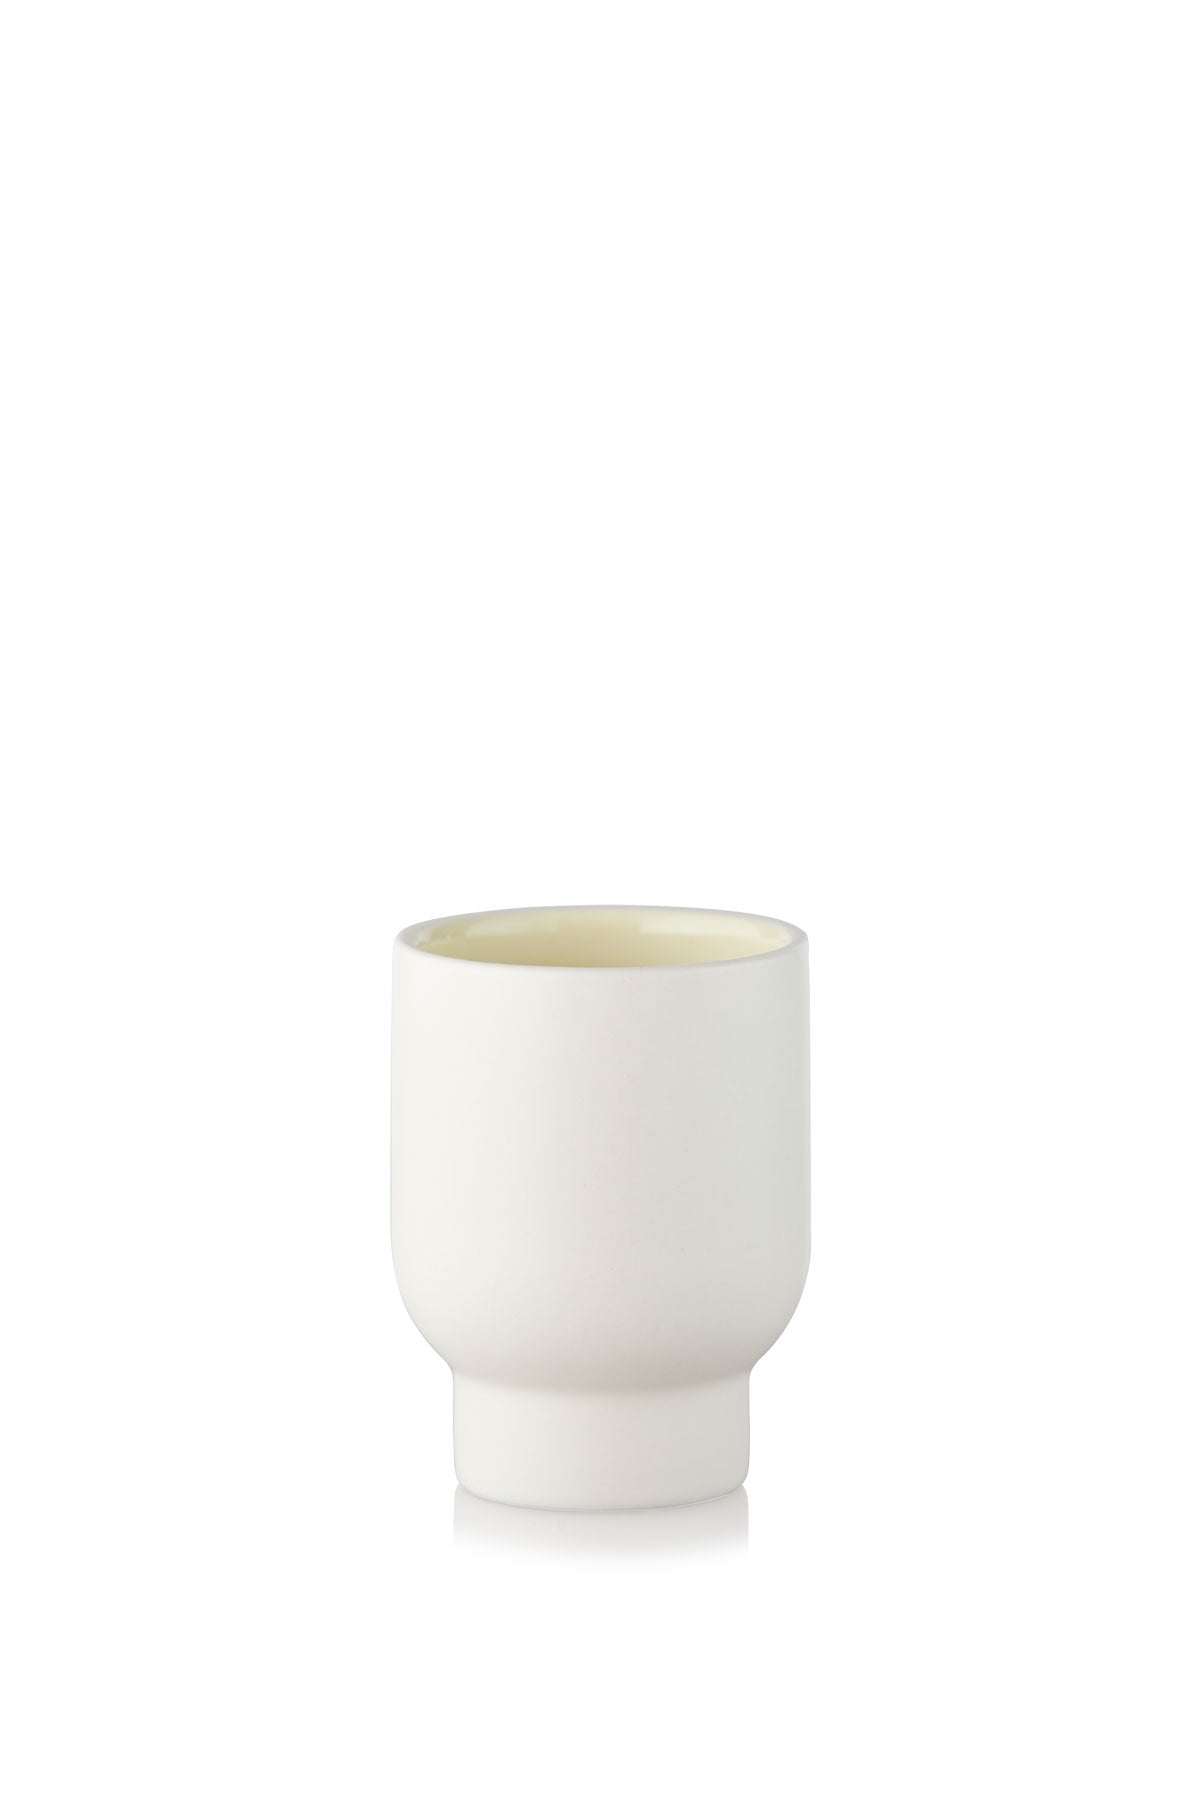 CLAYWARE, CUP, TALL, 2 STK, IVORY/YELLOW